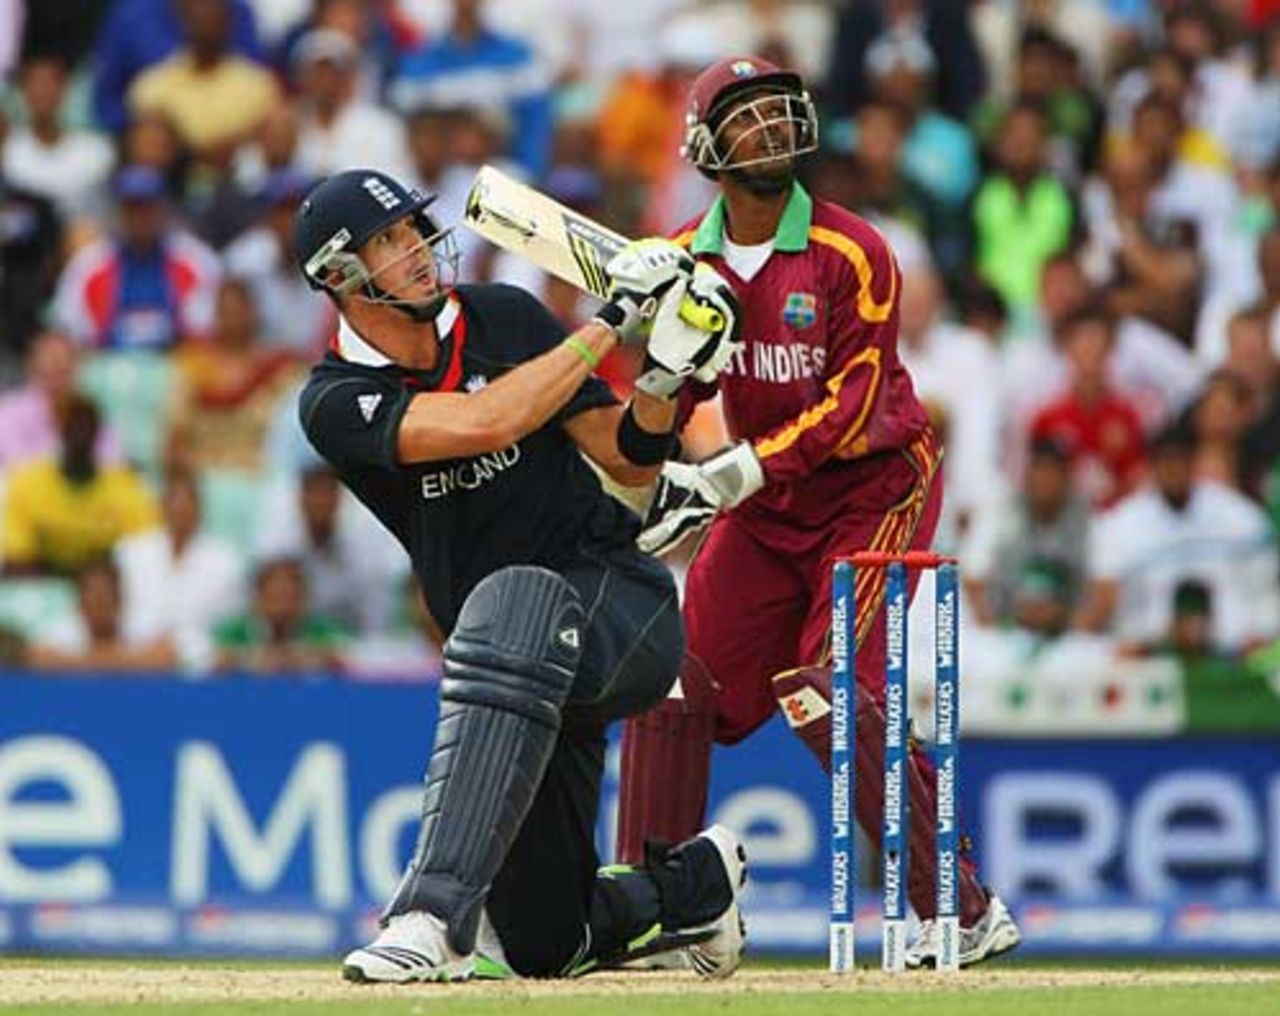 Kevin Pietersen sweeps during his 31 off 19 balls, England v West Indies, ICC World Twenty20, The Oval, June 15, 2009